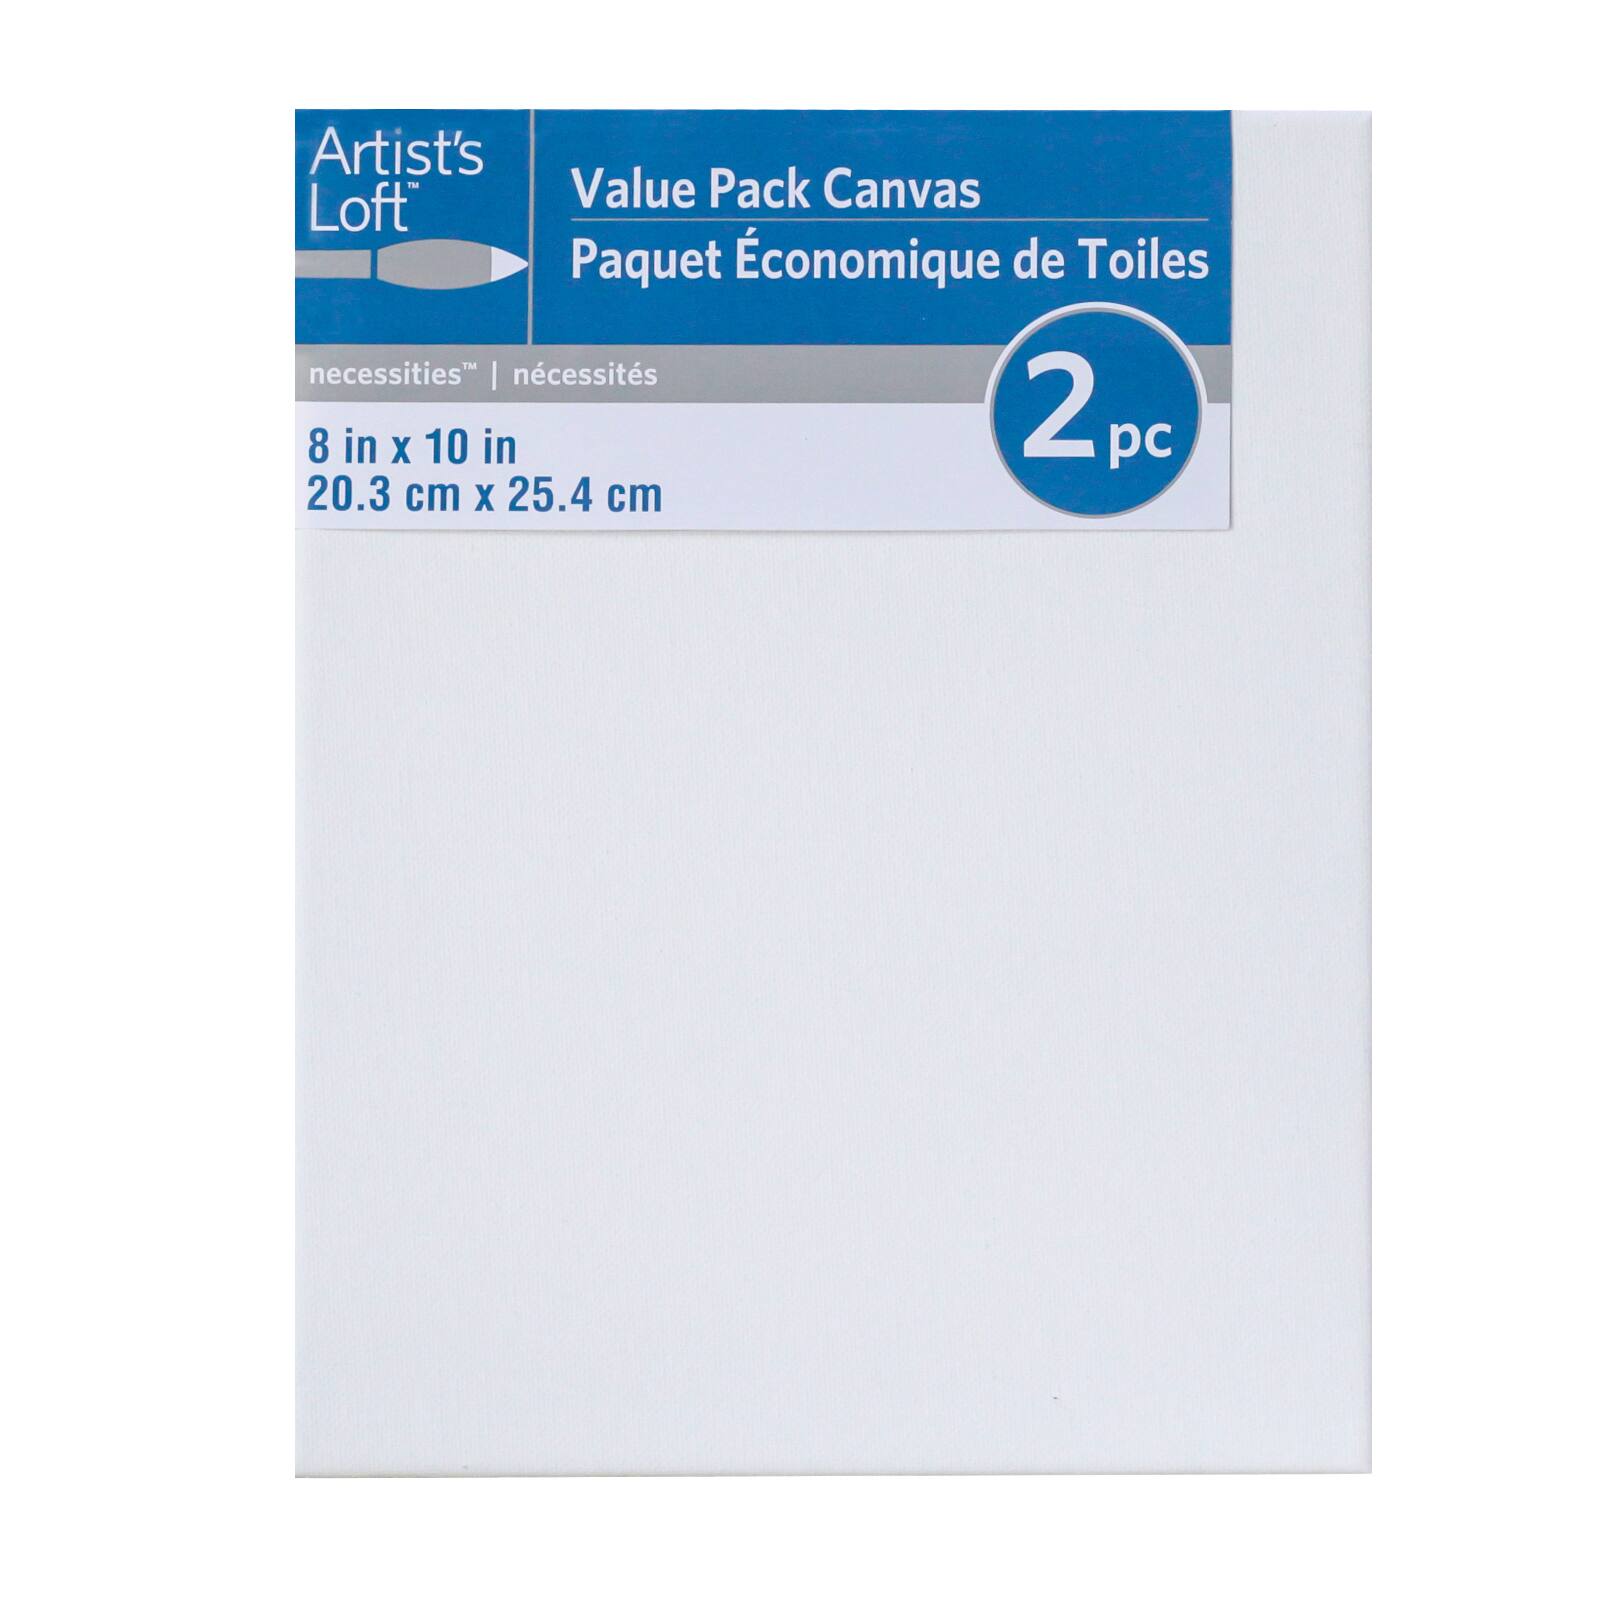 2 Pack Value Pack Canvas by Artist's Loft® Necessities™